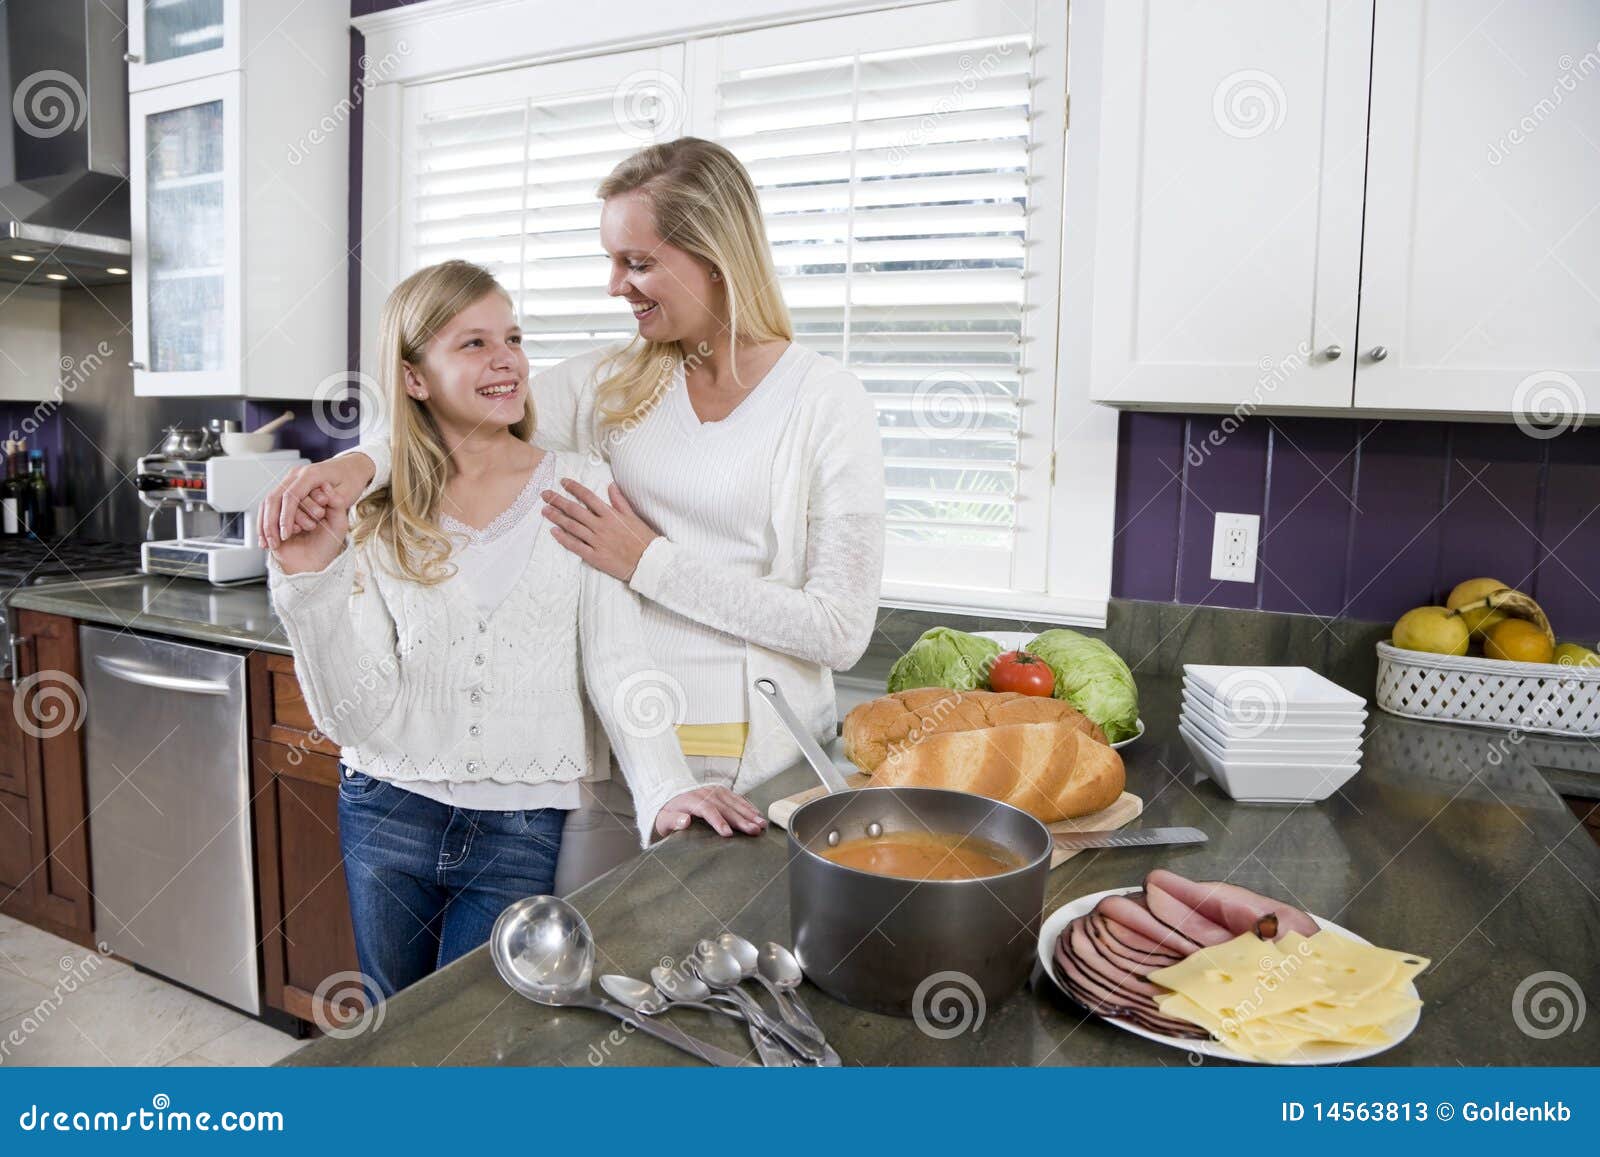 Mother And Daughter In Kitchen Making Lunch Stock Image Image Of Smiling Female 14563813 